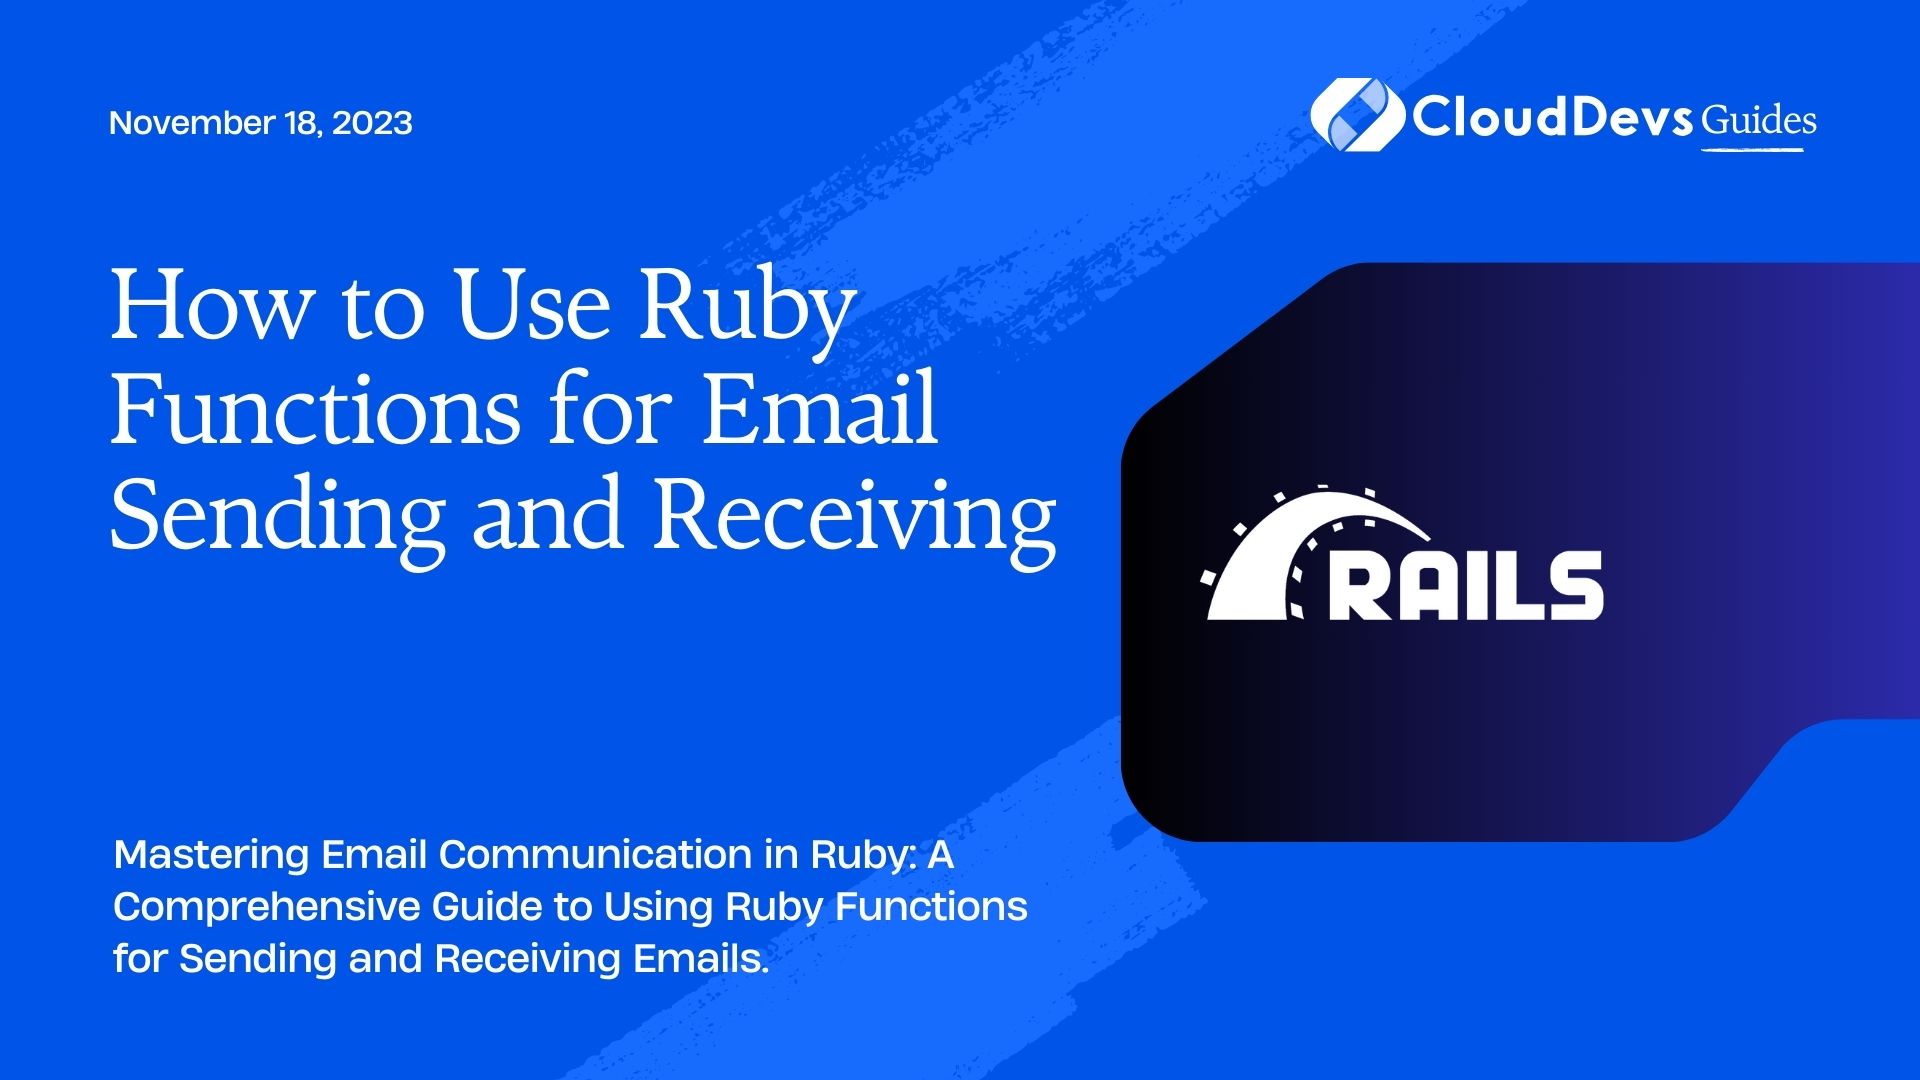 How to Use Ruby Functions for Email Sending and Receiving